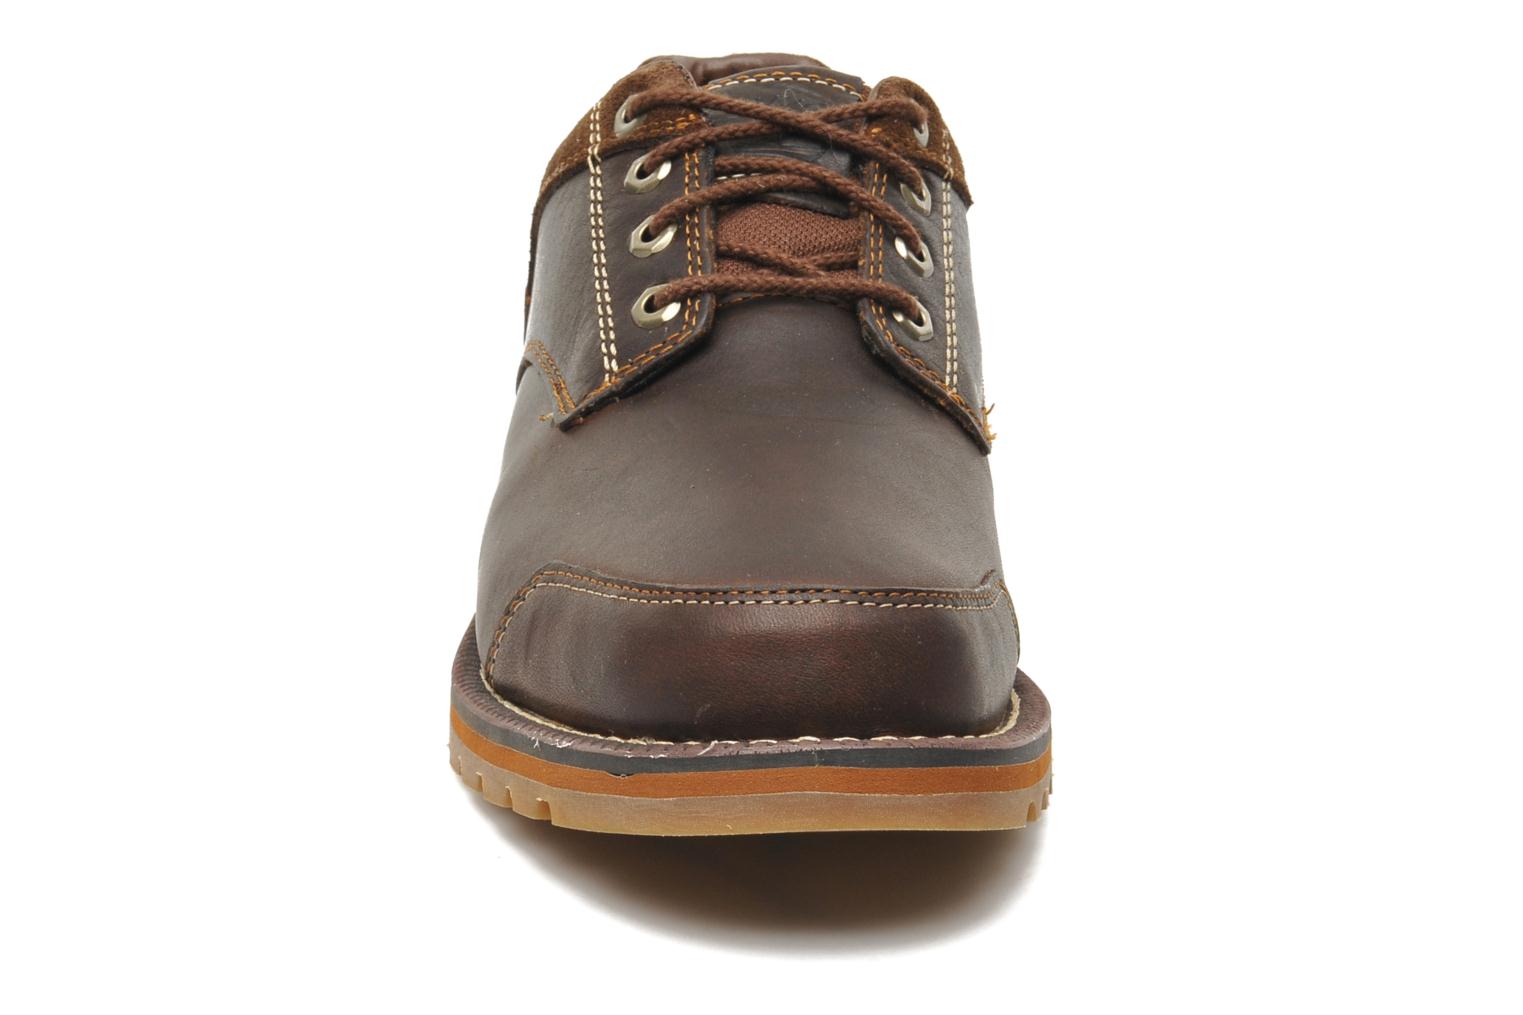 Timberland Earthkeepers Larchmont Oxford Lace-up shoes in Brown at ...